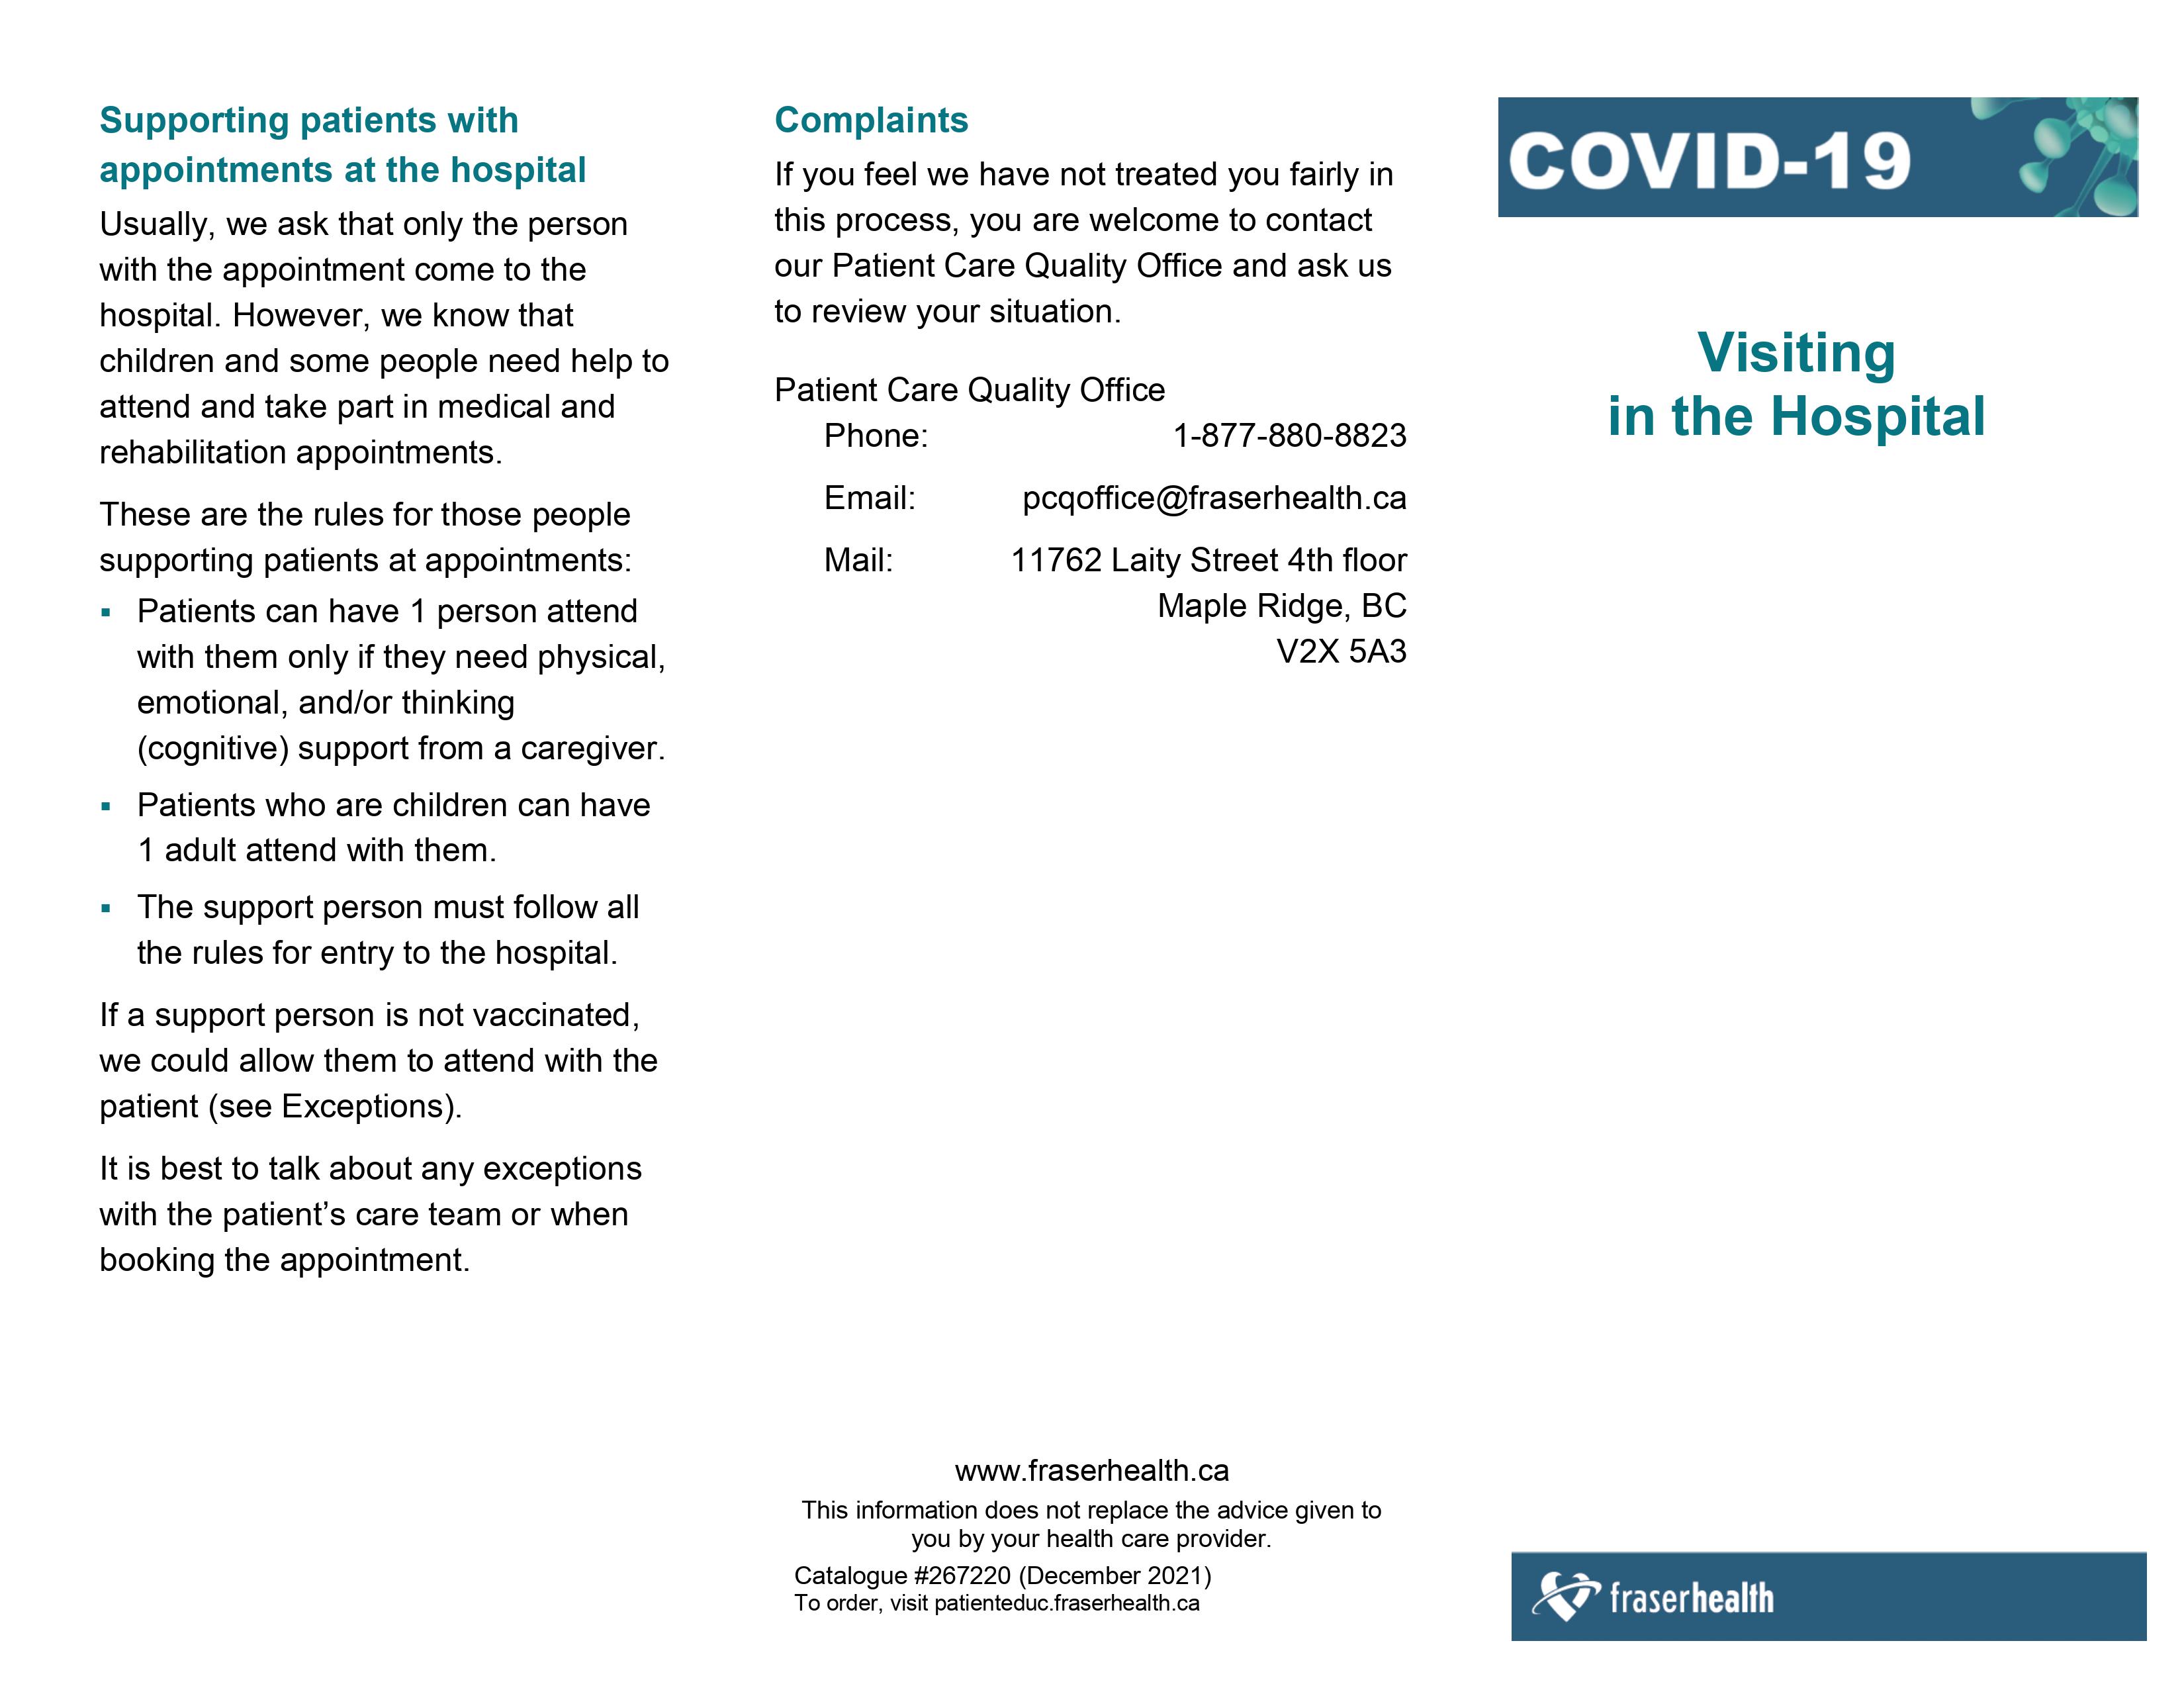 Resource for visiting in the hospital during COVID-19